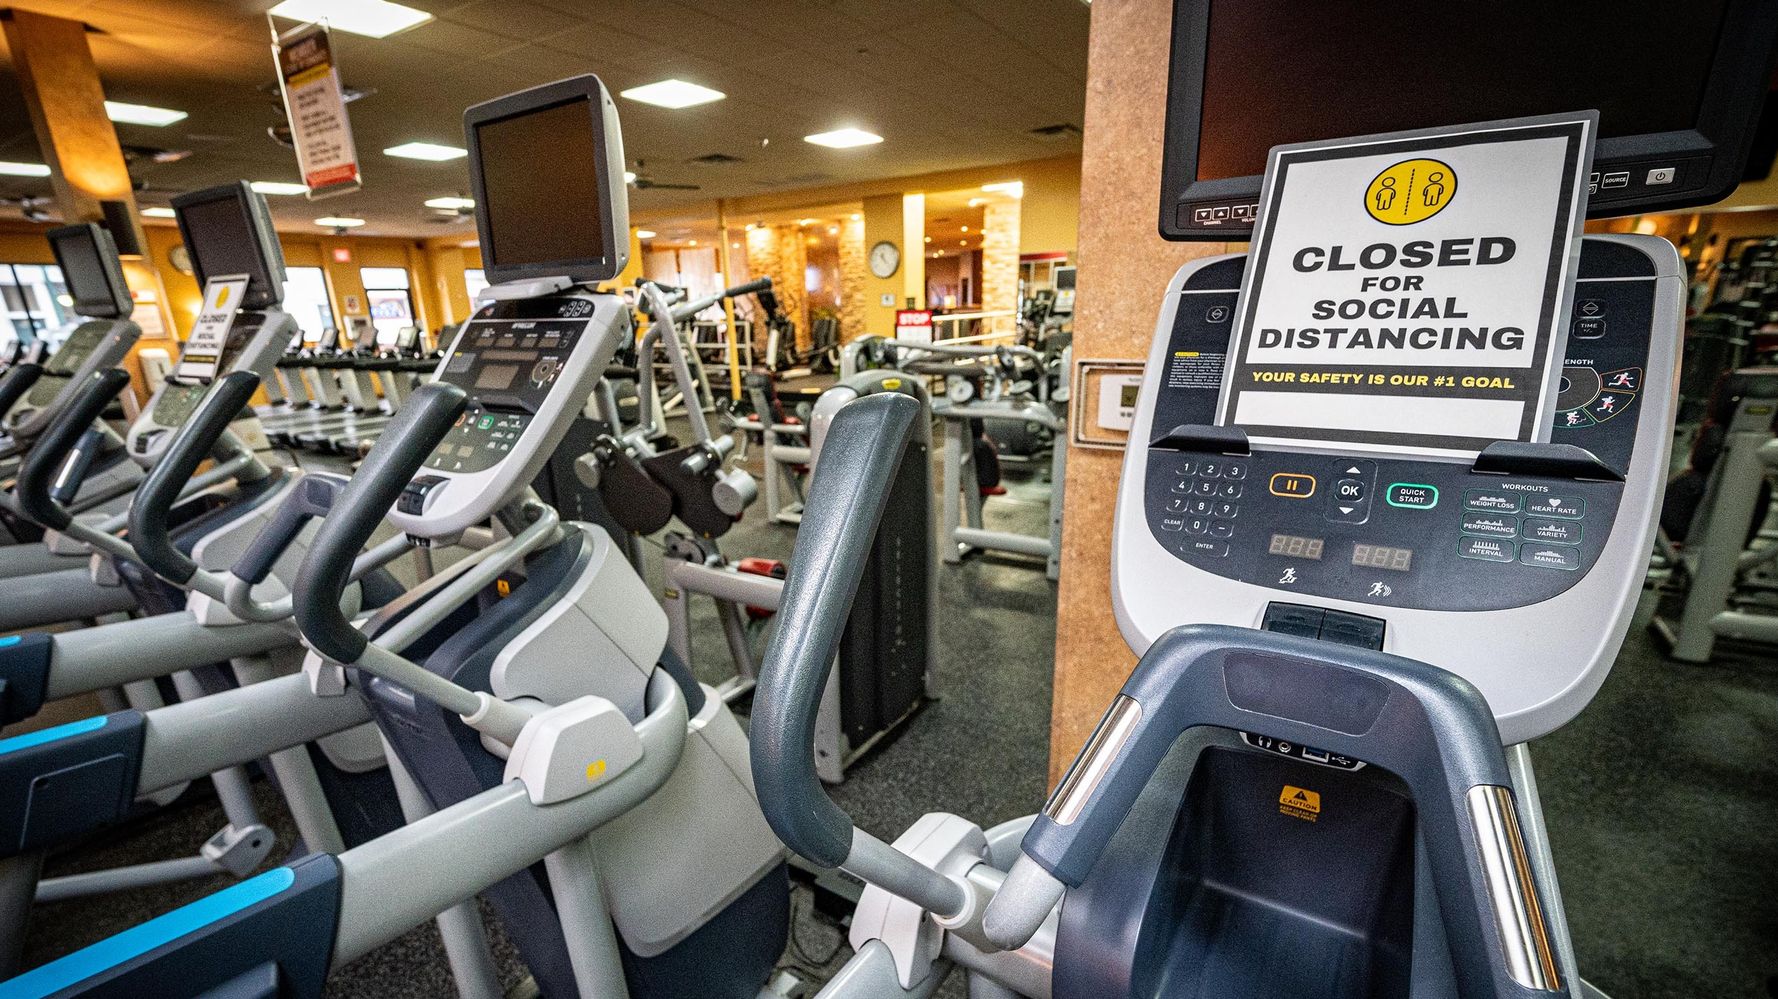 CDC recommends stricter precautions at the gym after outbreaks of COVID-19 linked to facilities